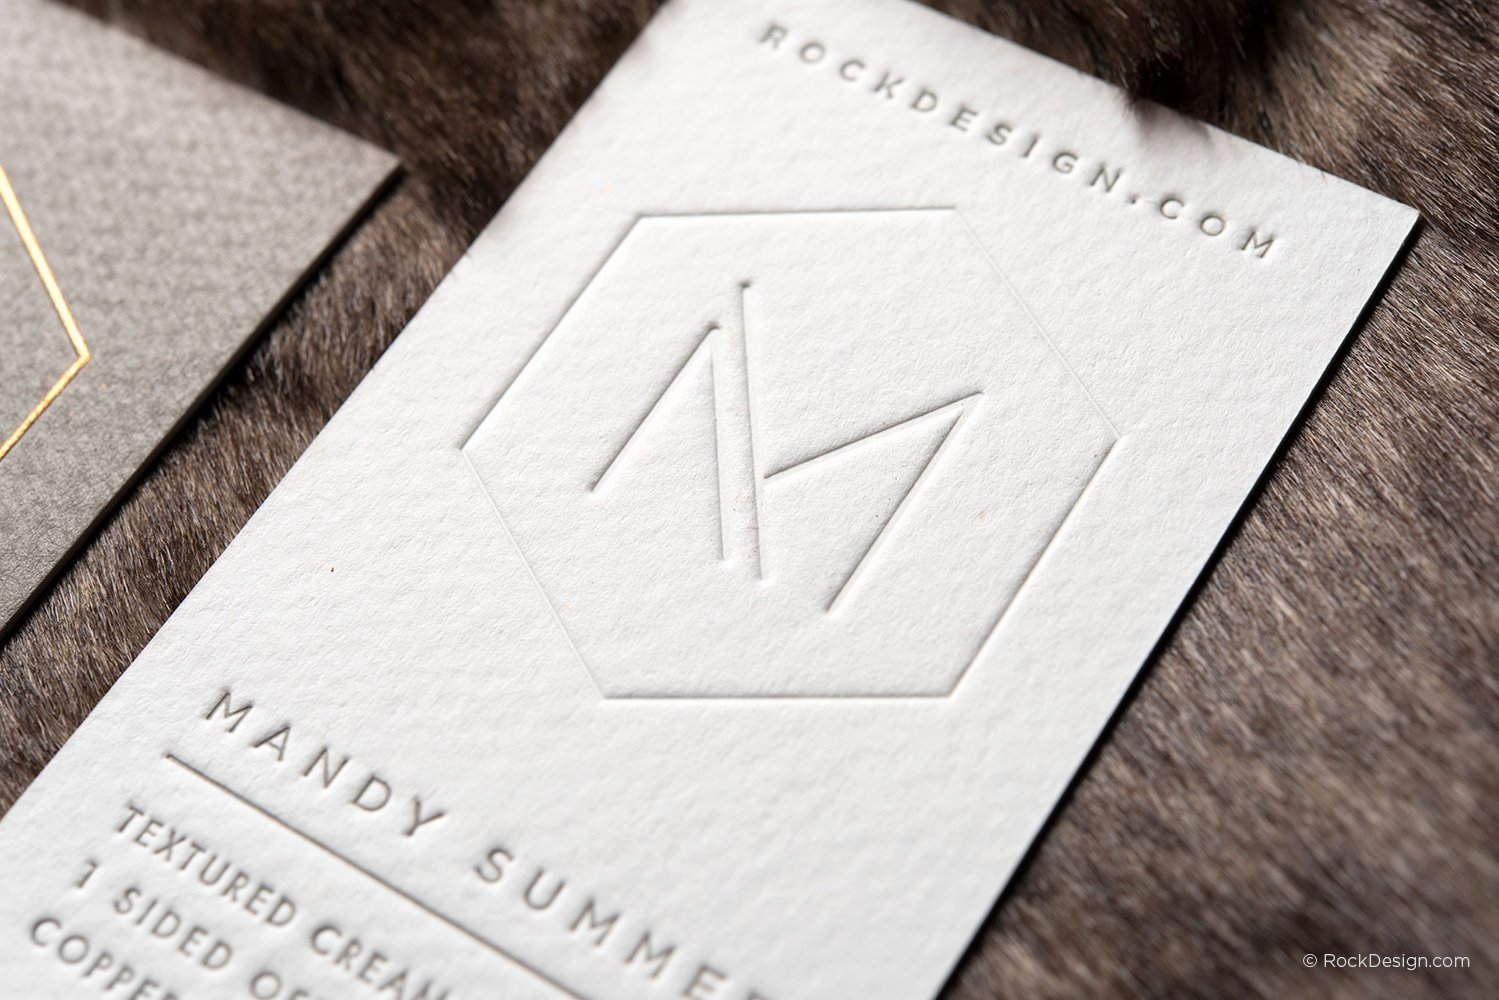 Interior Design Business Card Awesome Interior Designer Template On Textured Stock with Emboss